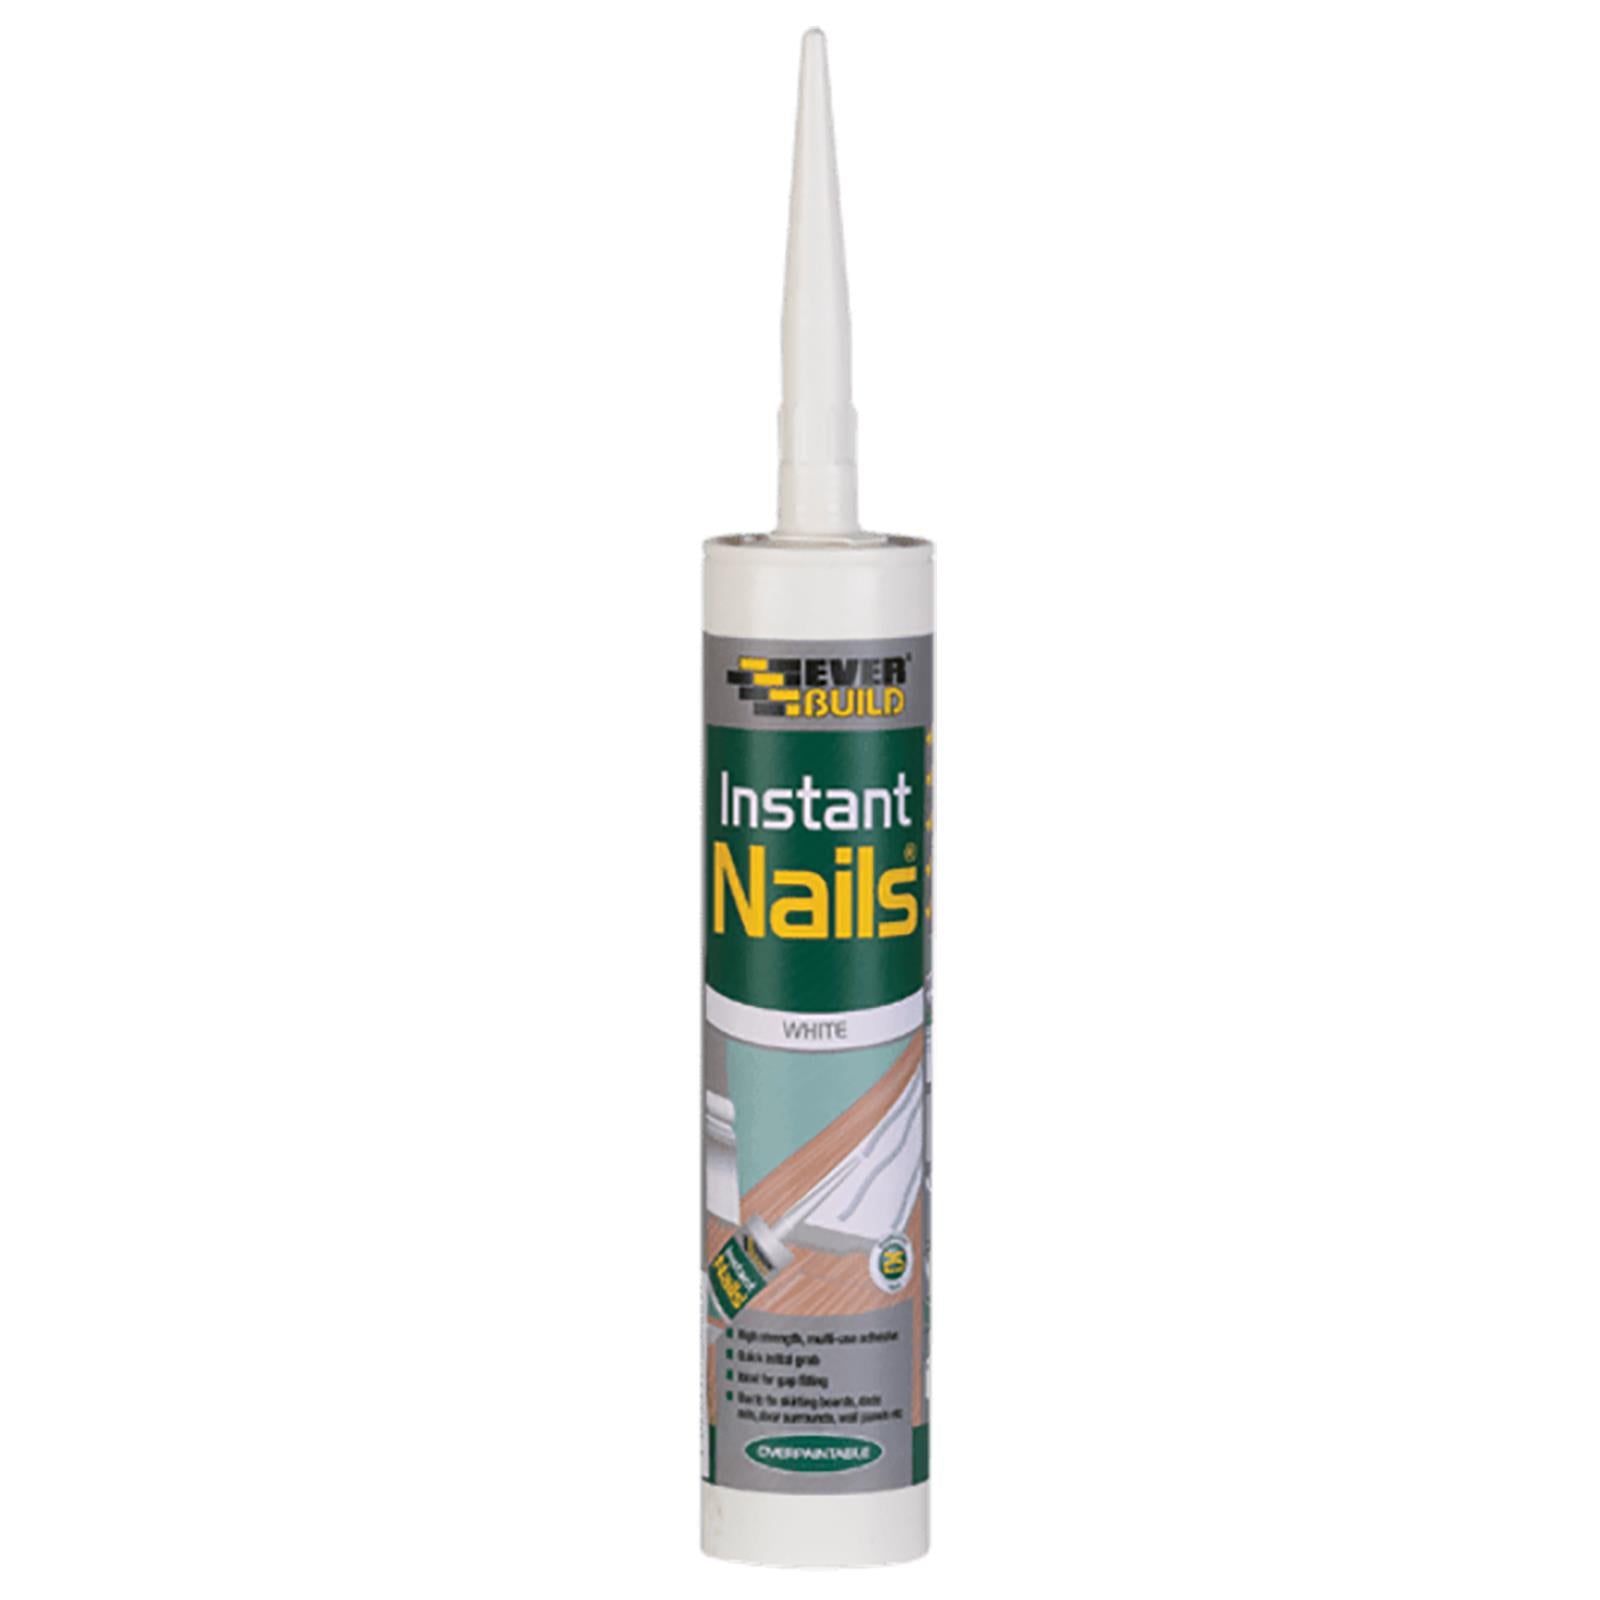 EverBuild Instant Nails White 290ml High Strength Solvent Free Gap Filling